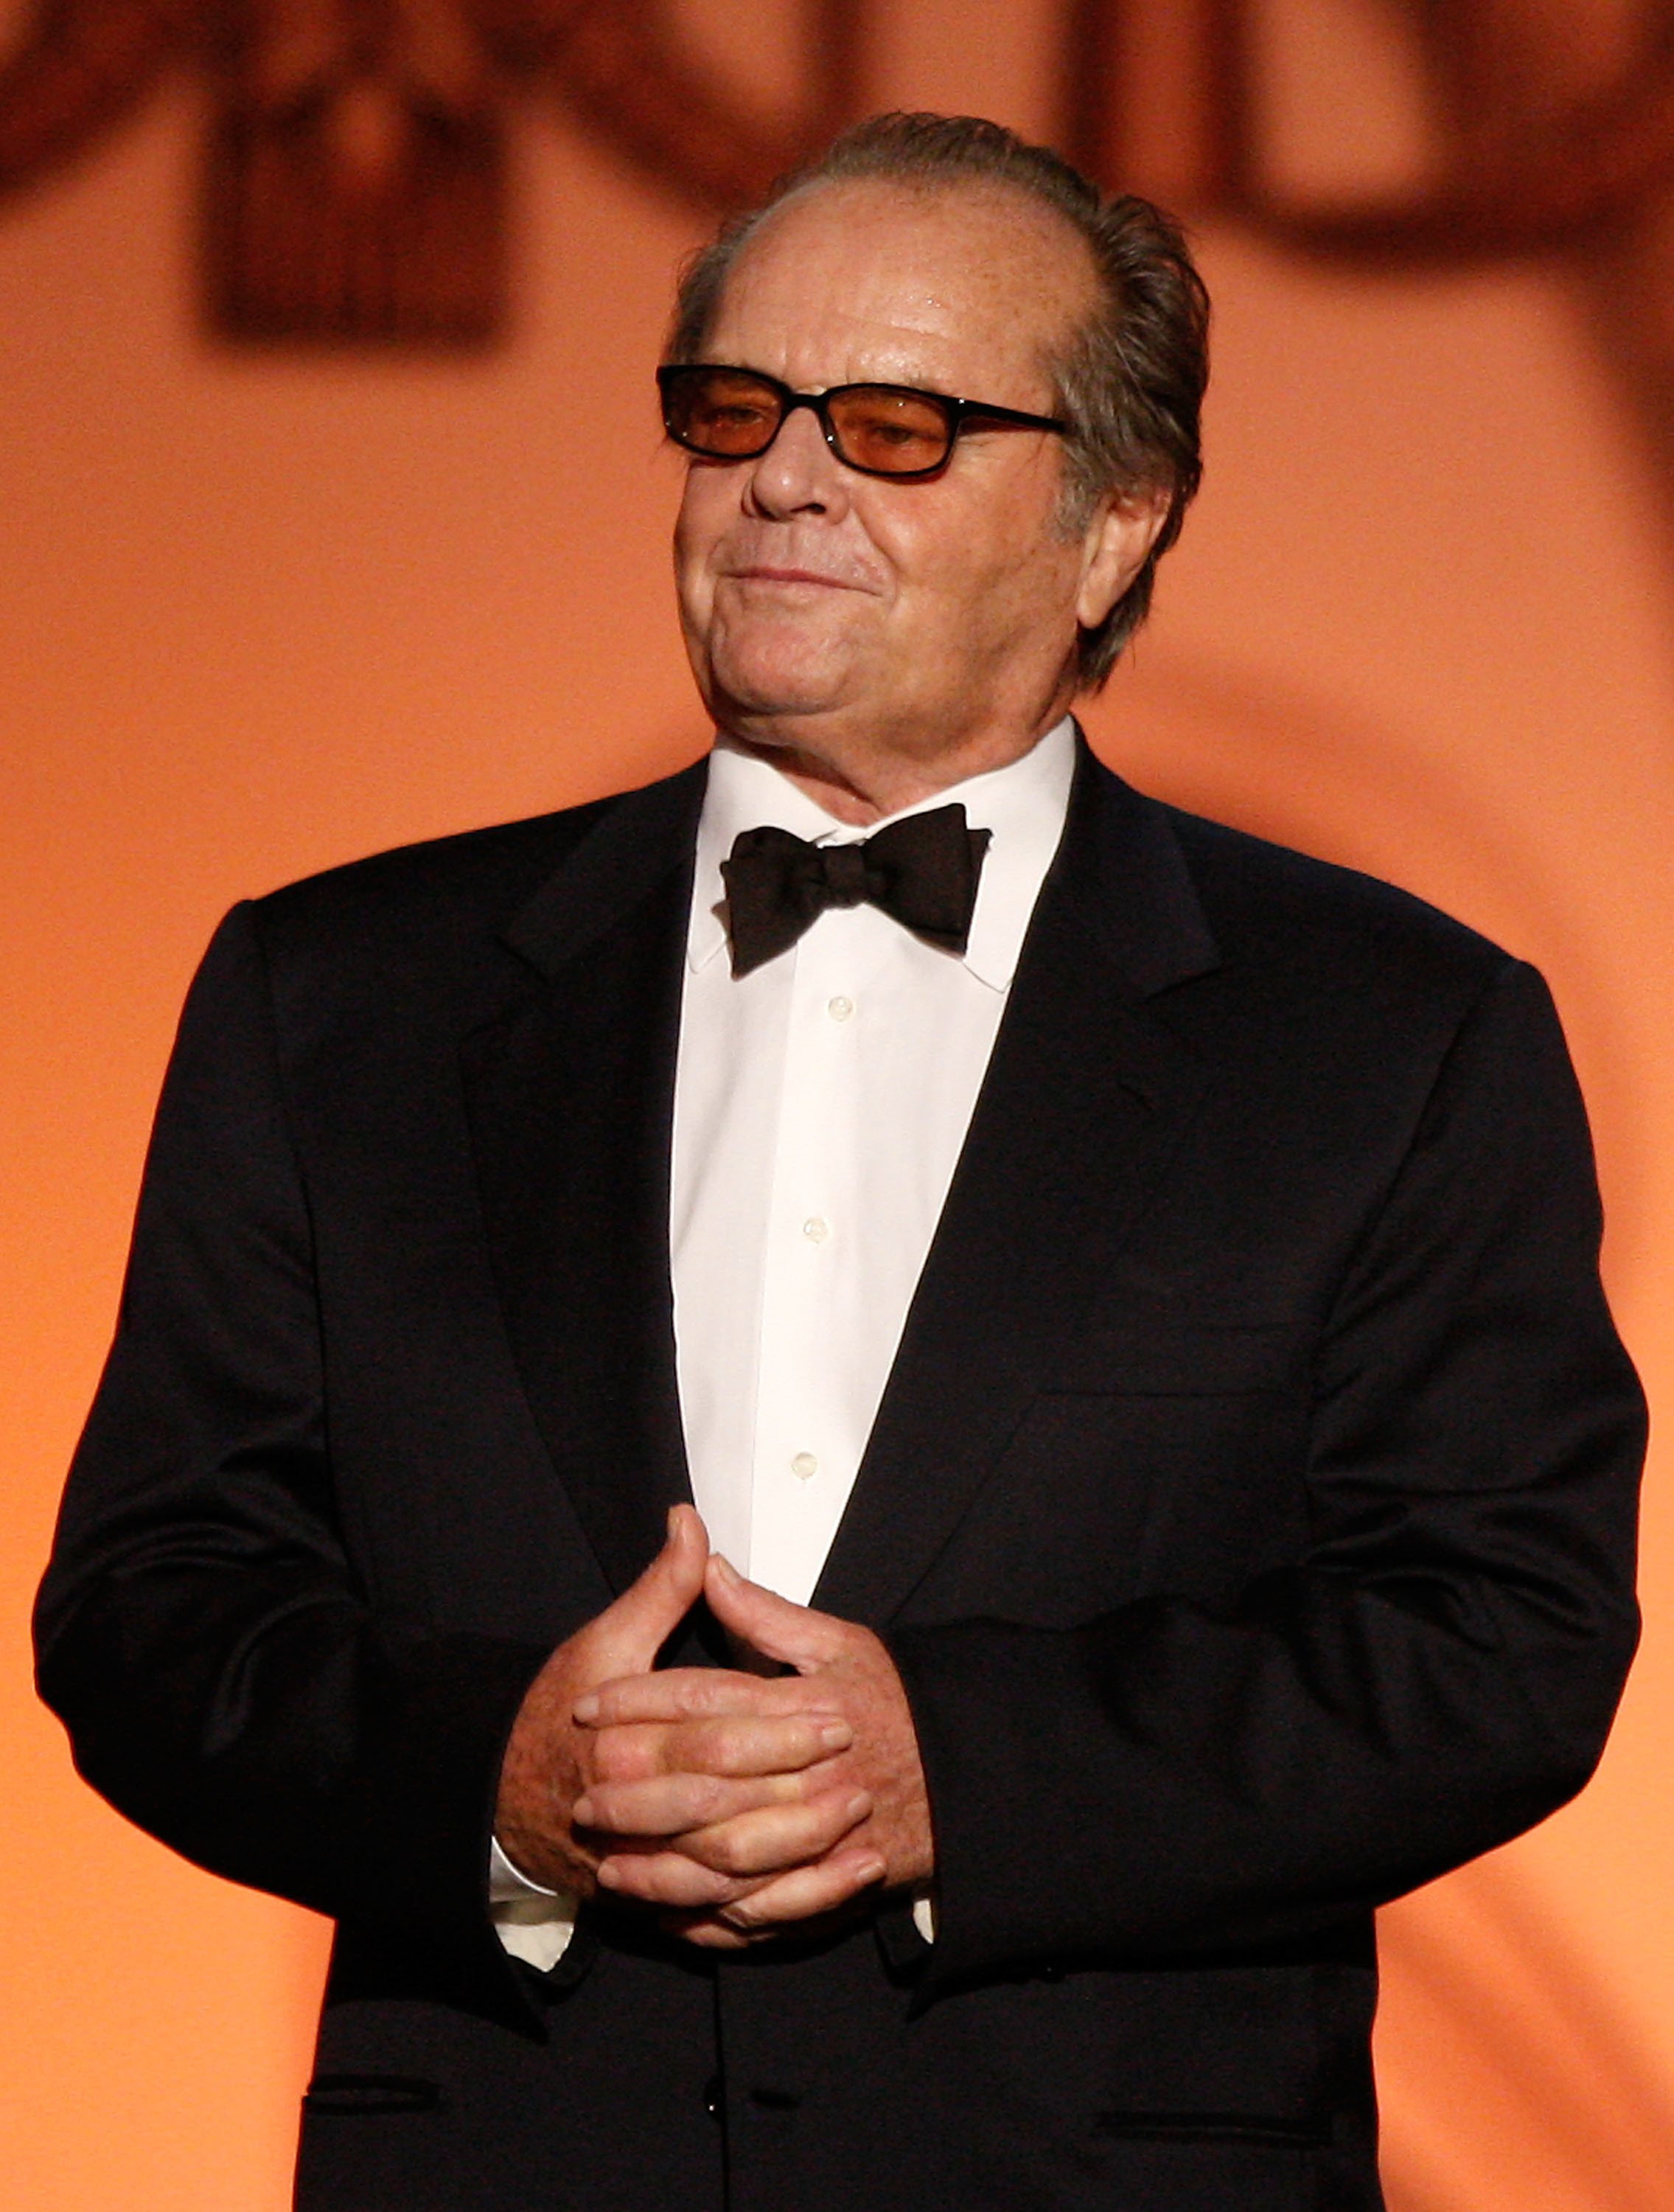 Actor Jack Nicholson speaks onstage during the AFI Life Achievement Award: A Tribute to Michael Douglas at Sony Pictures Studios on June 11, 2009 | Photo: Getty Images